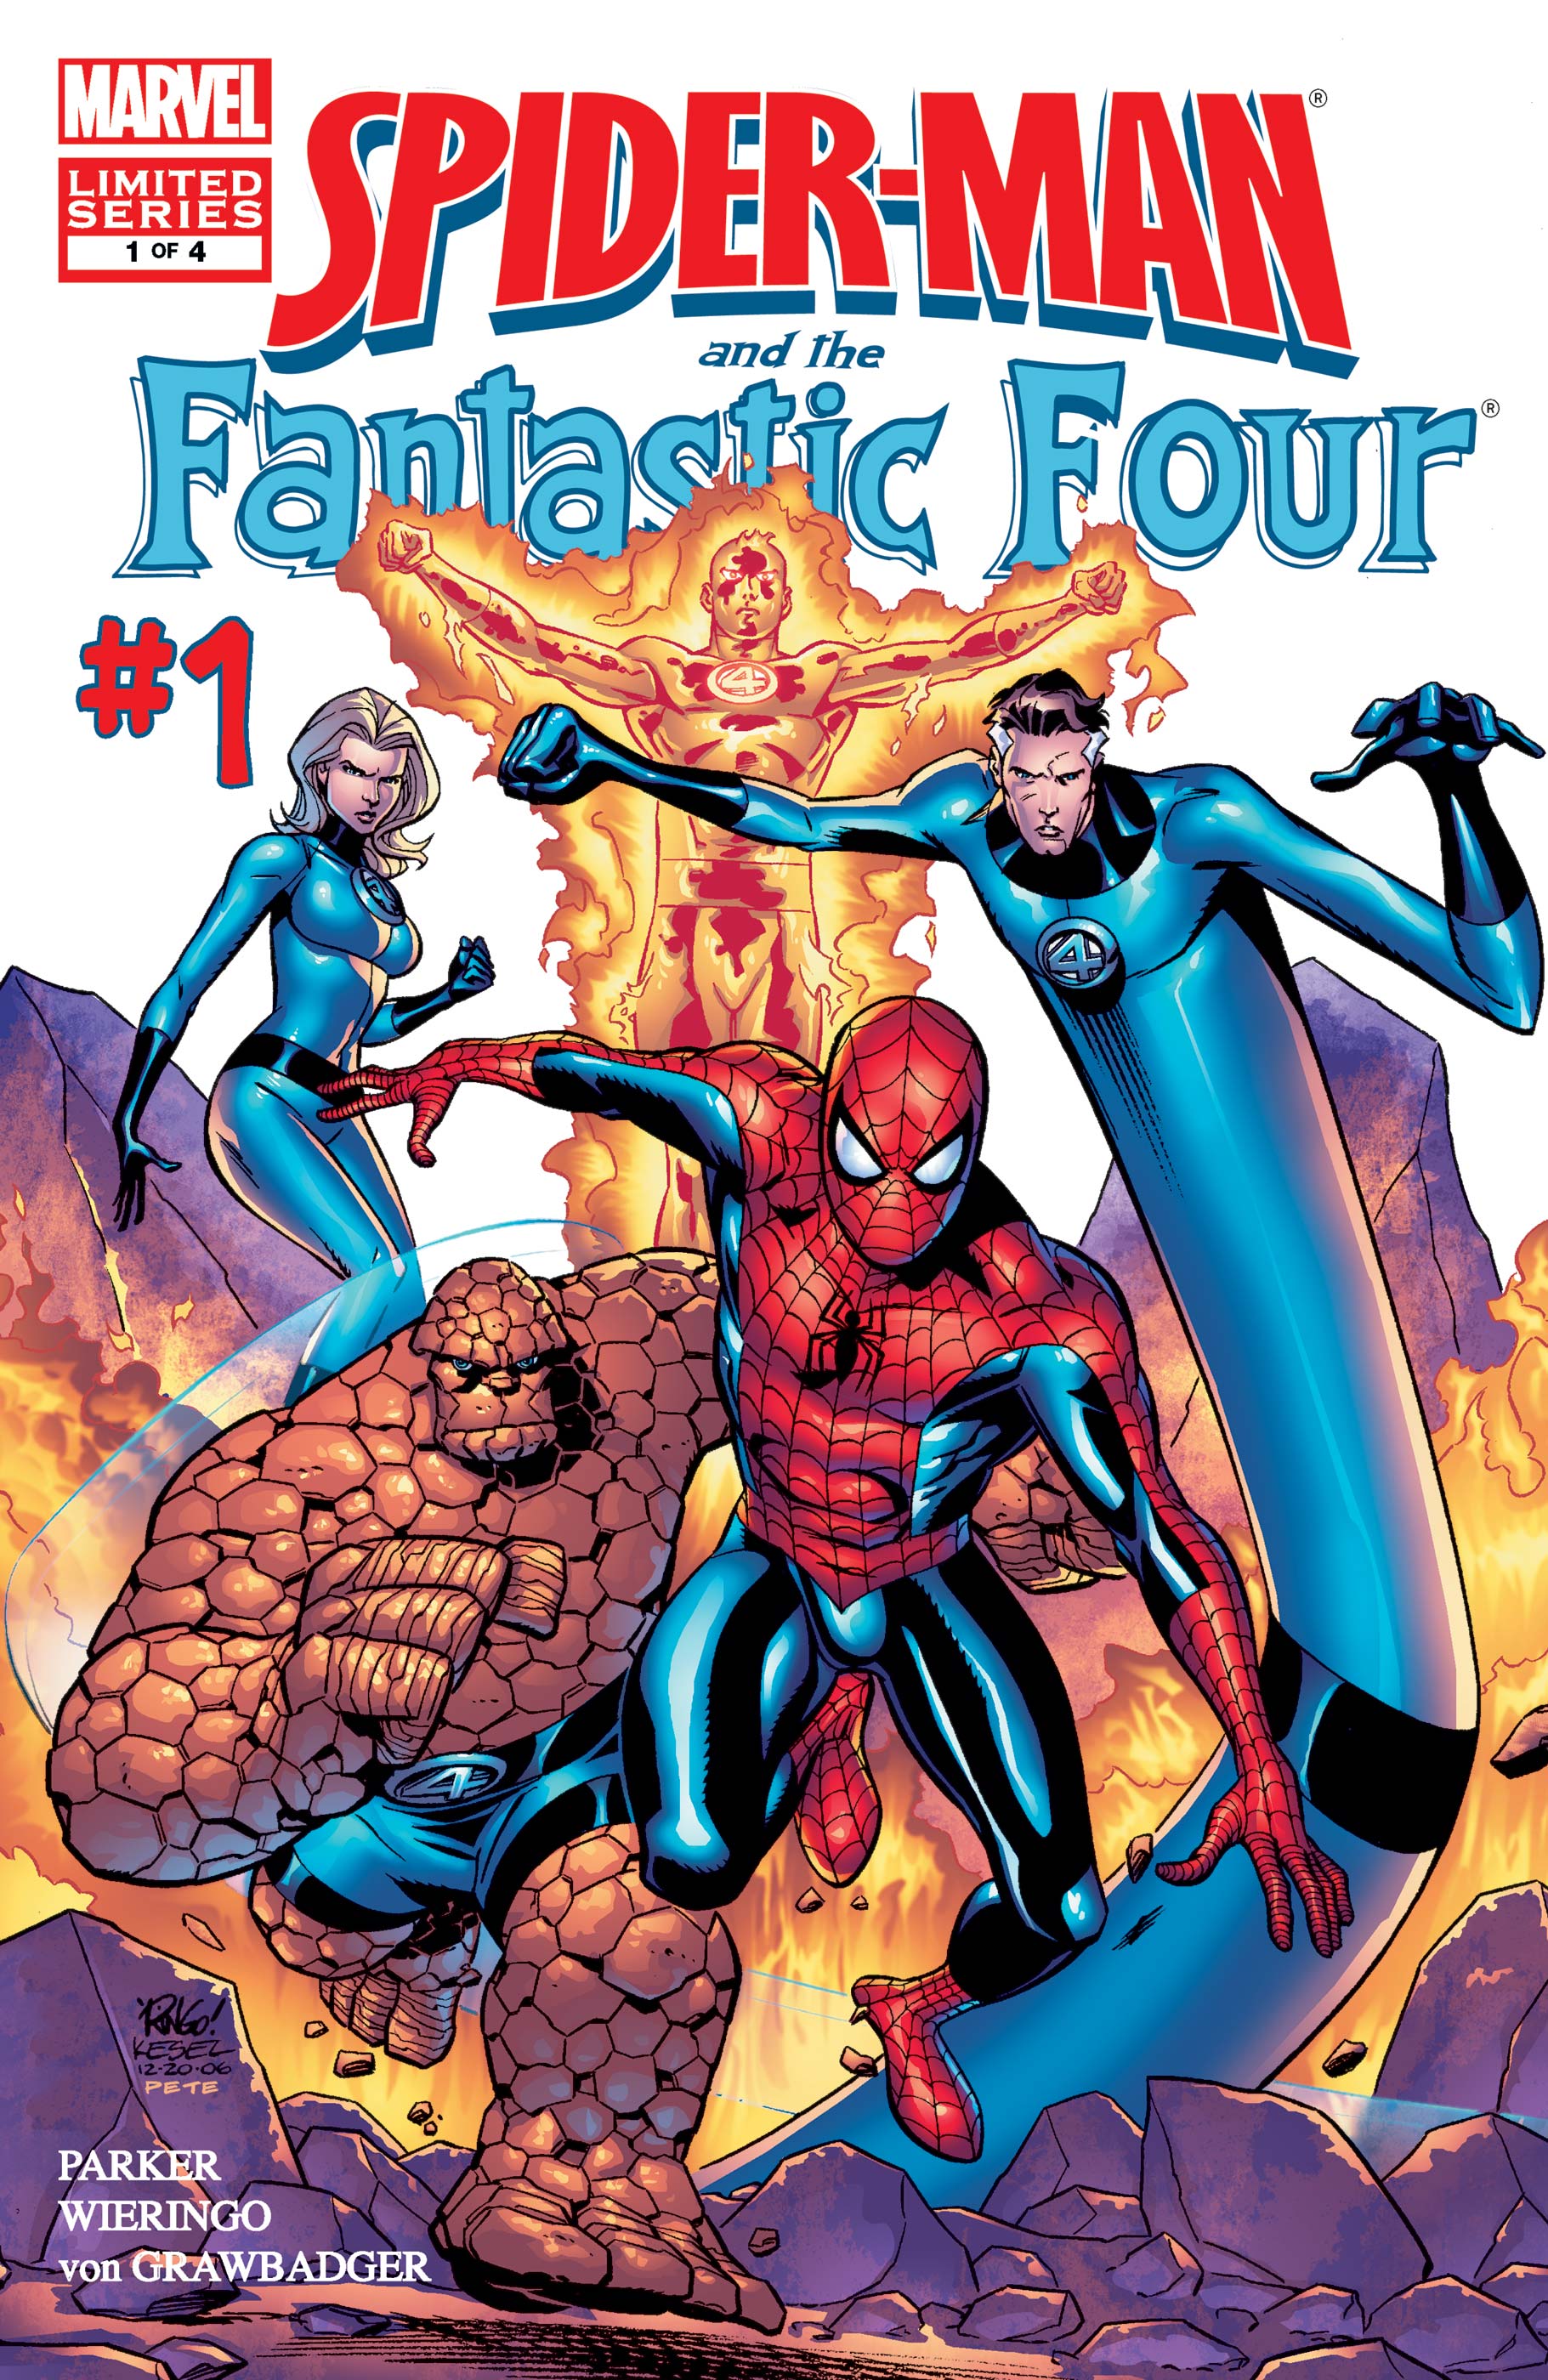 Spider-Man and the Fantastic Four (2007) #1